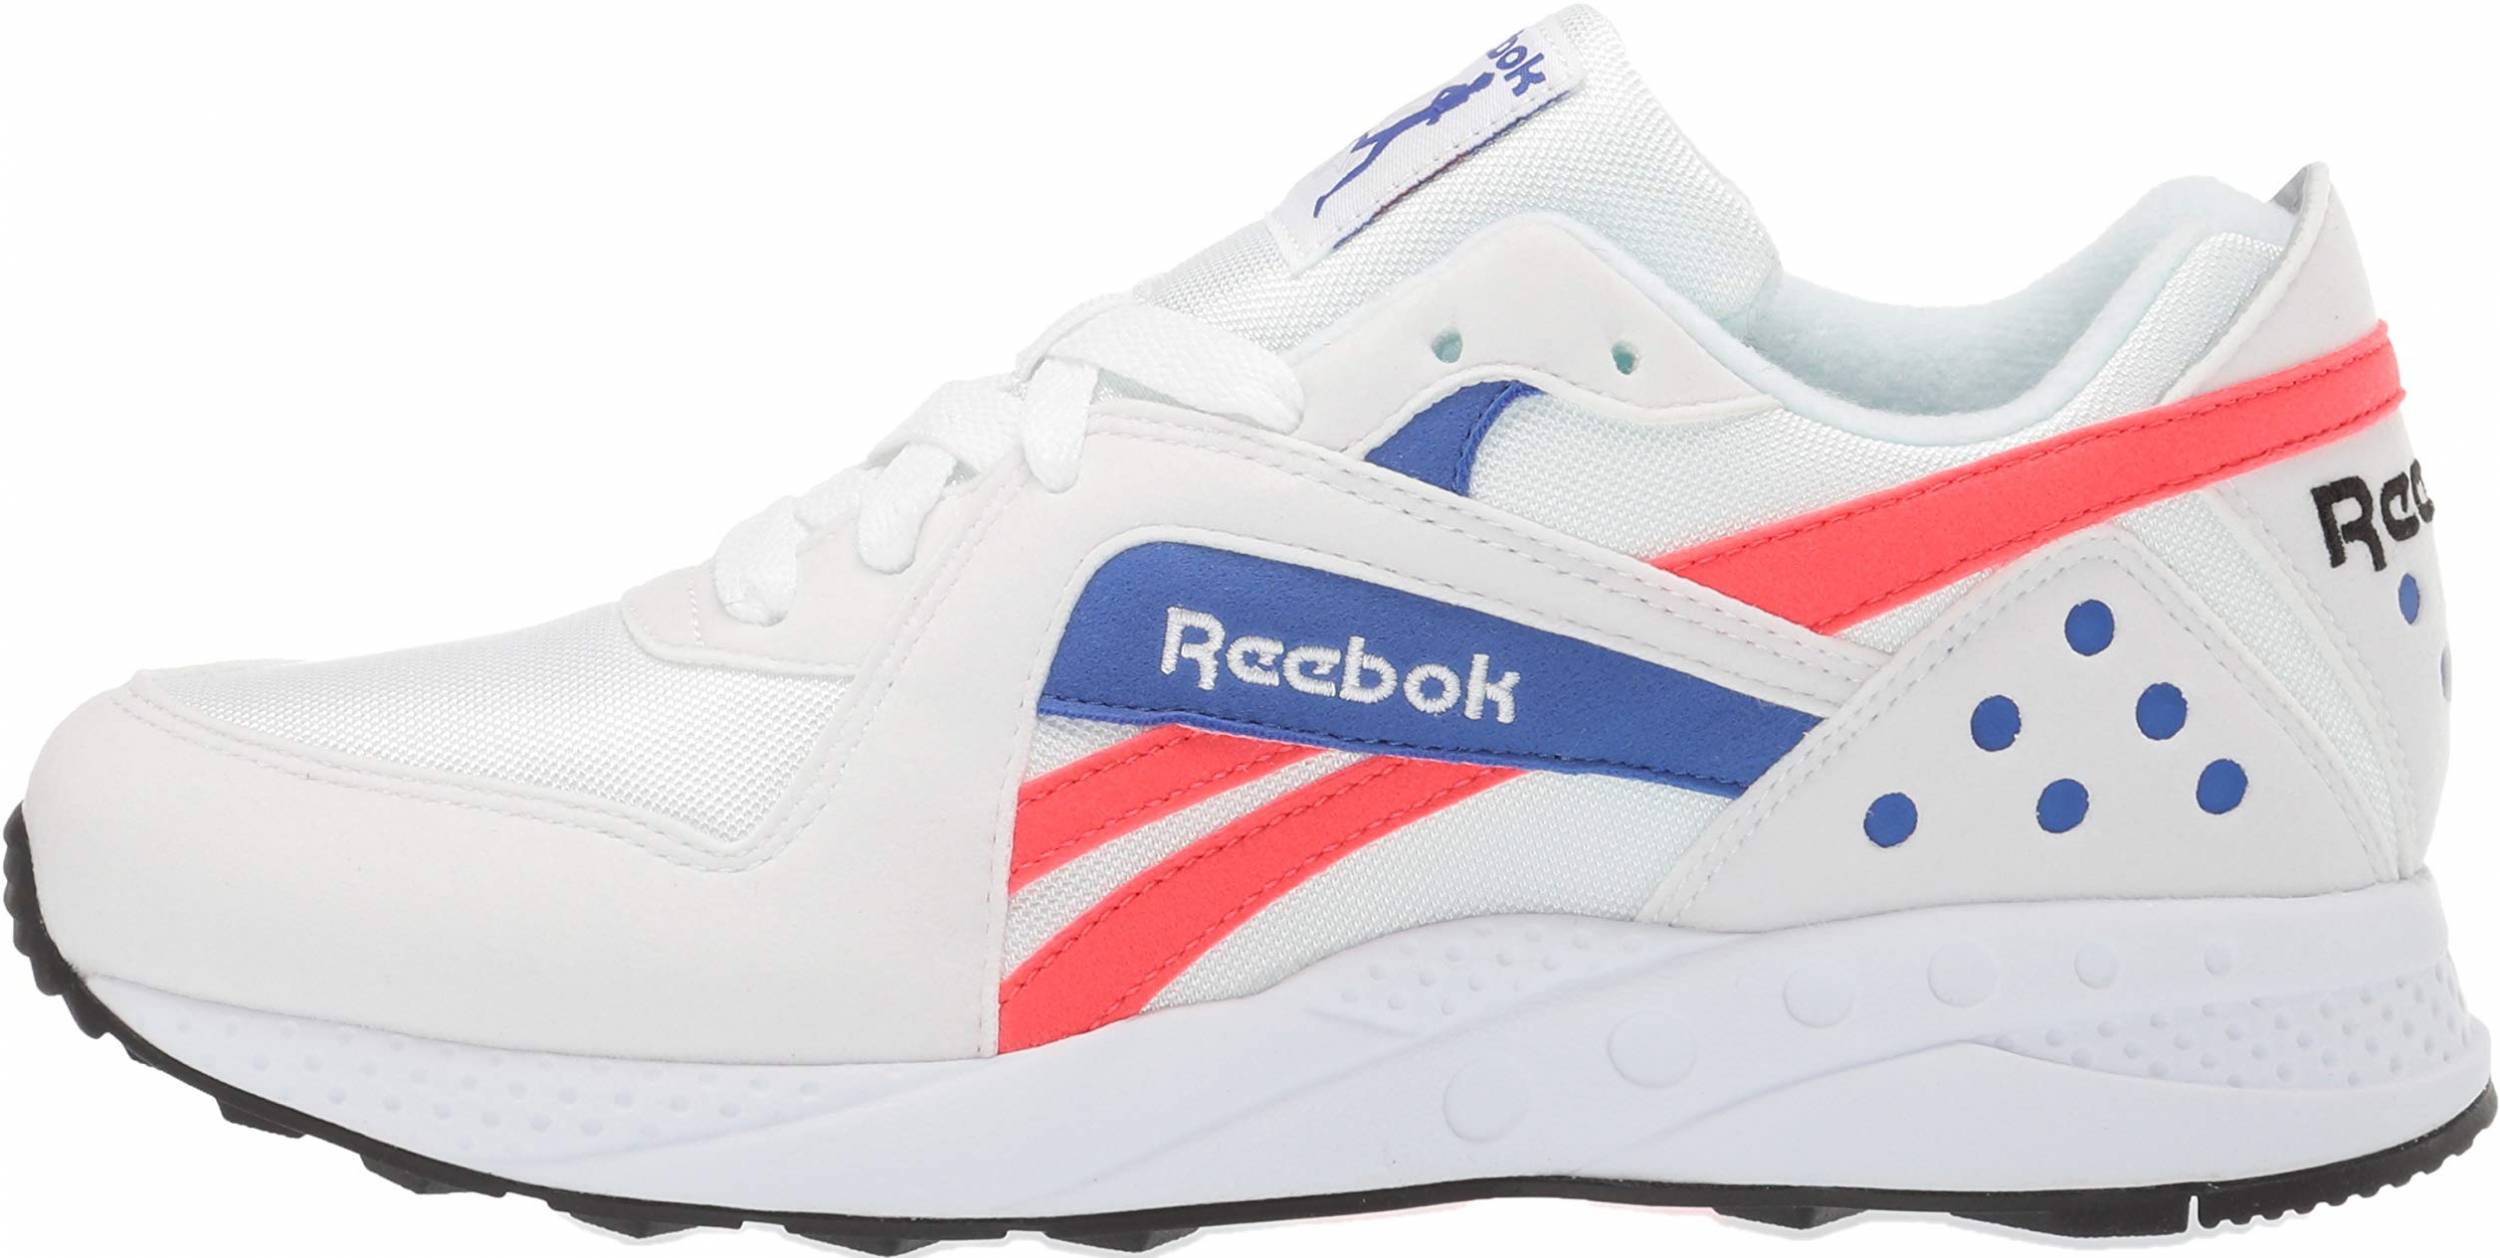 Reebok Pyro sneakers in 5 colors (only $55) | Chaussures Reebok Flexagon Energy Tr 4 GY6263 Pure Grey 5 Grey 2 Cloud White | CaribbeanpoultryShops